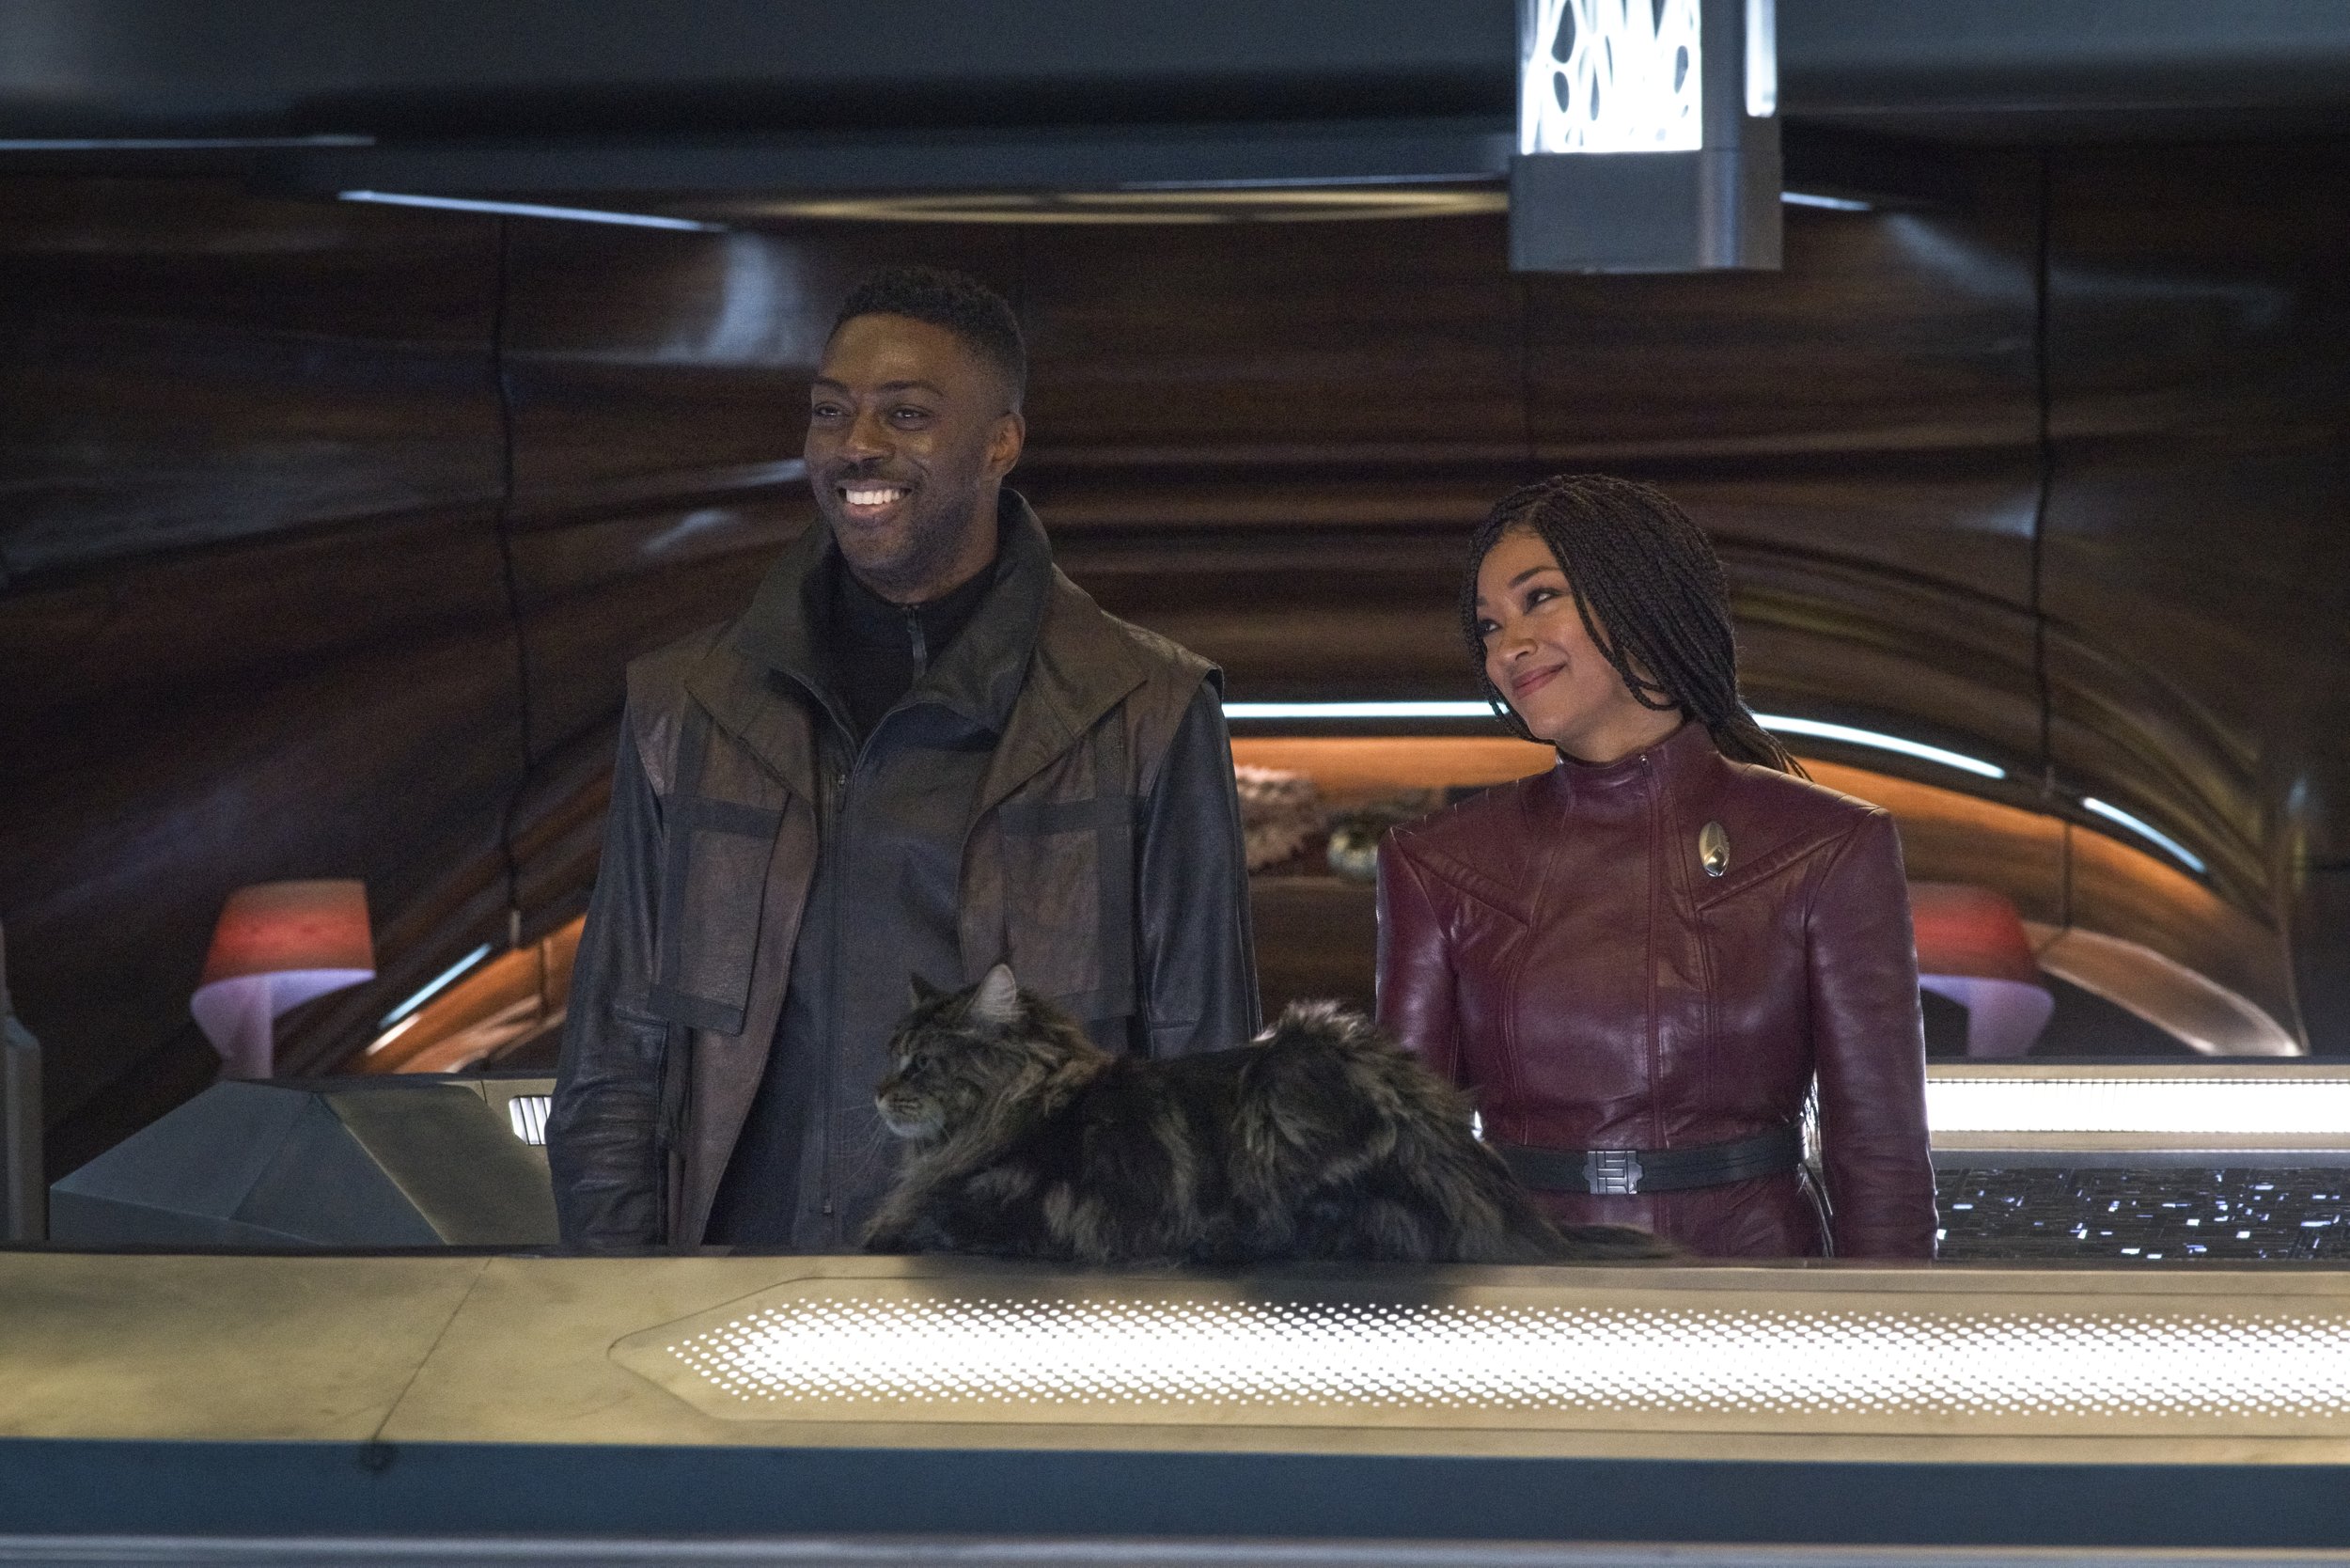   Pictured: David Ajala as Book and Sonequa Martin Green as Burnham of the Paramount+ original series STAR TREK: DISCOVERY. Photo Cr: Michael Gibson/ViacomCBS © 2021 ViacomCBS. All Rights Reserved.  